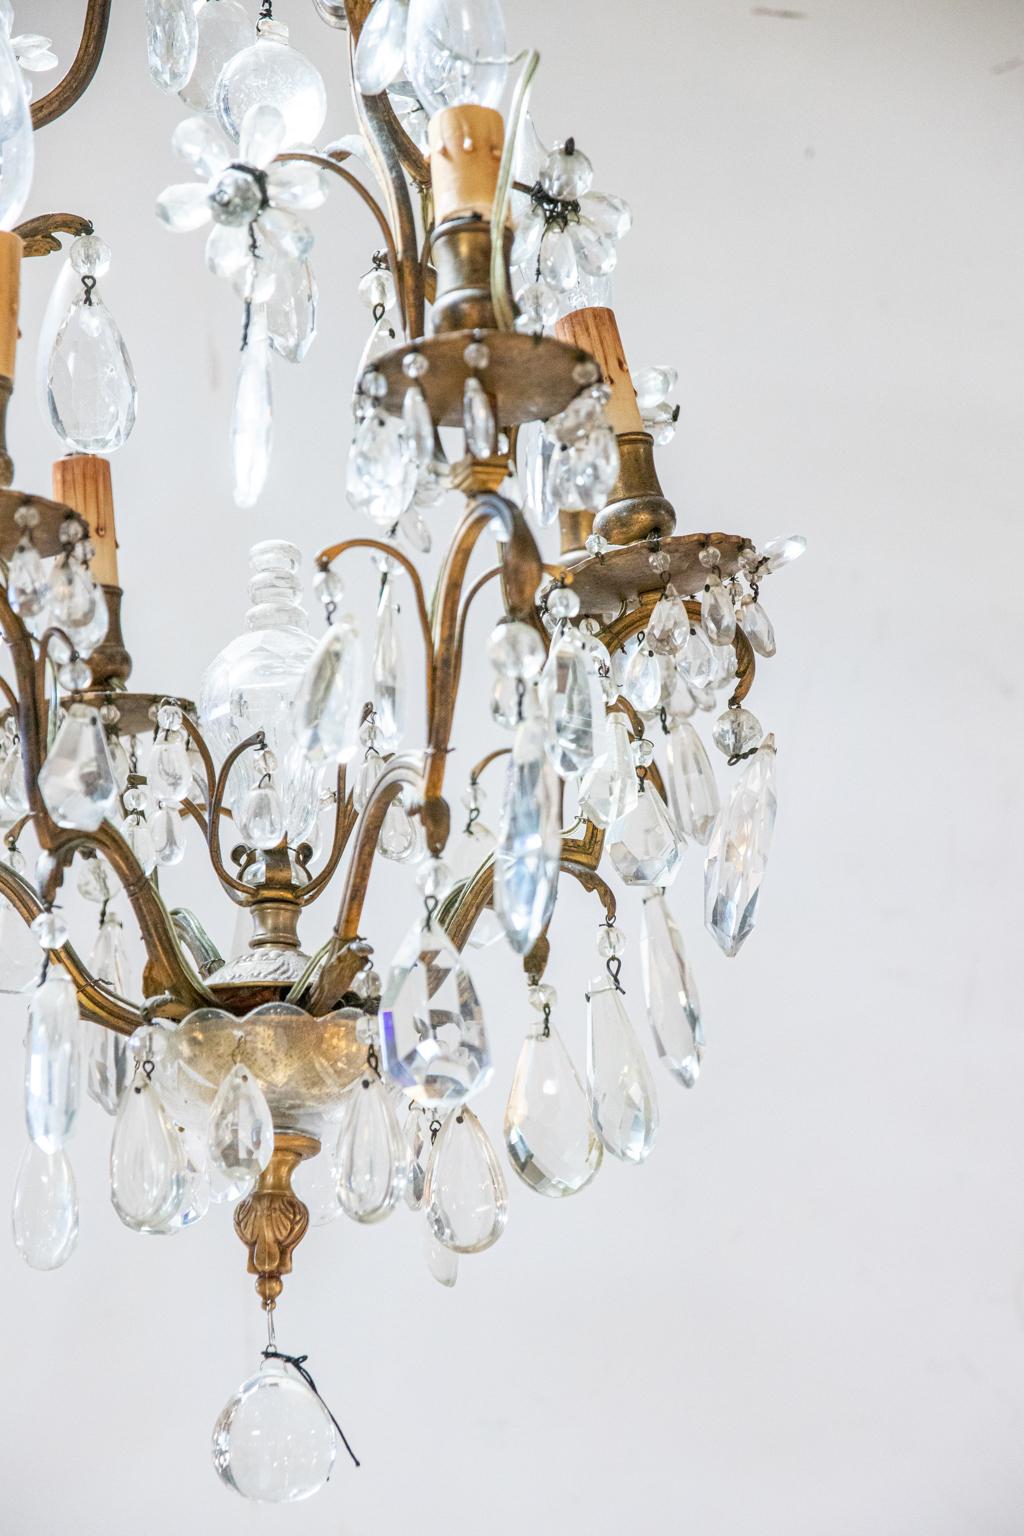 French bronze chandelier with six arms and various pendant almond shaped prisms. These prisms can be seen underneath the arms and bobeches. The chandelier is also constructed with a large glass bulb finial at the center of the piece. Please note of